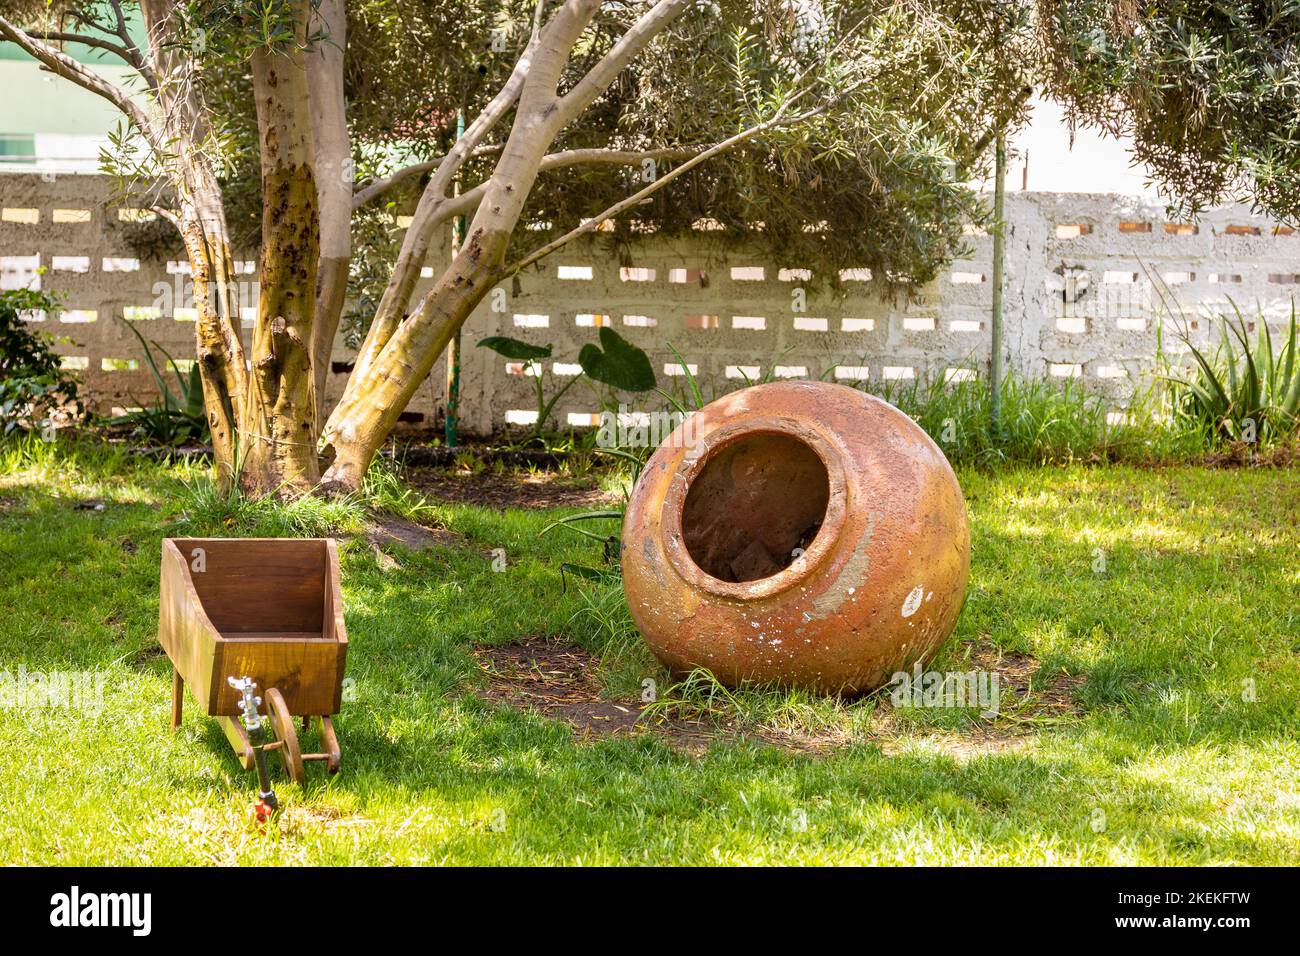 A shot of an old clay wine jug and a wooden wheelbarrow on the grass. Stock Photo